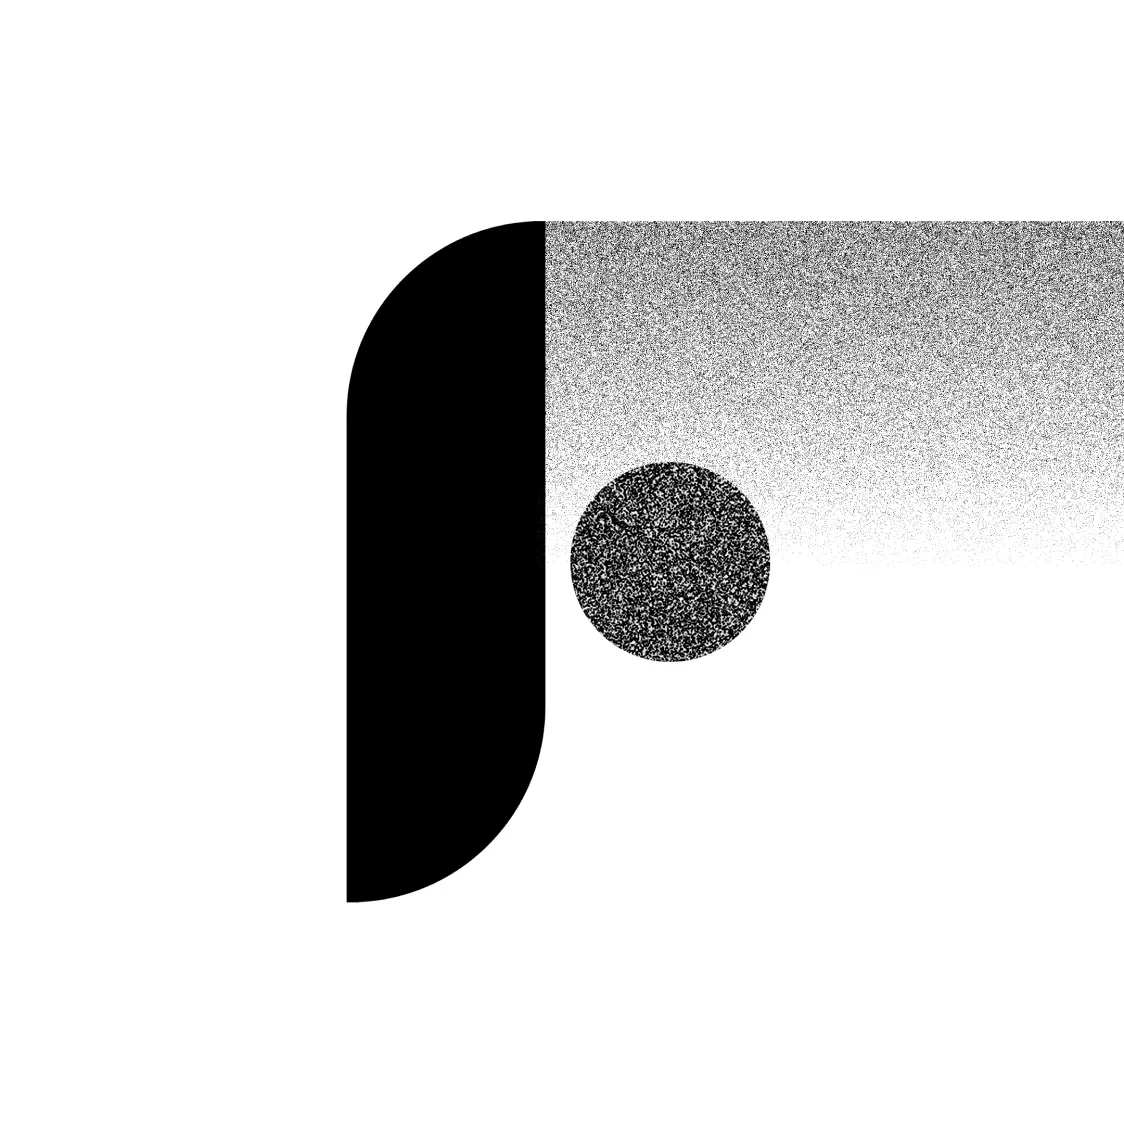 The letter 'f' made out of simple shapes and gradients of grainy black and white